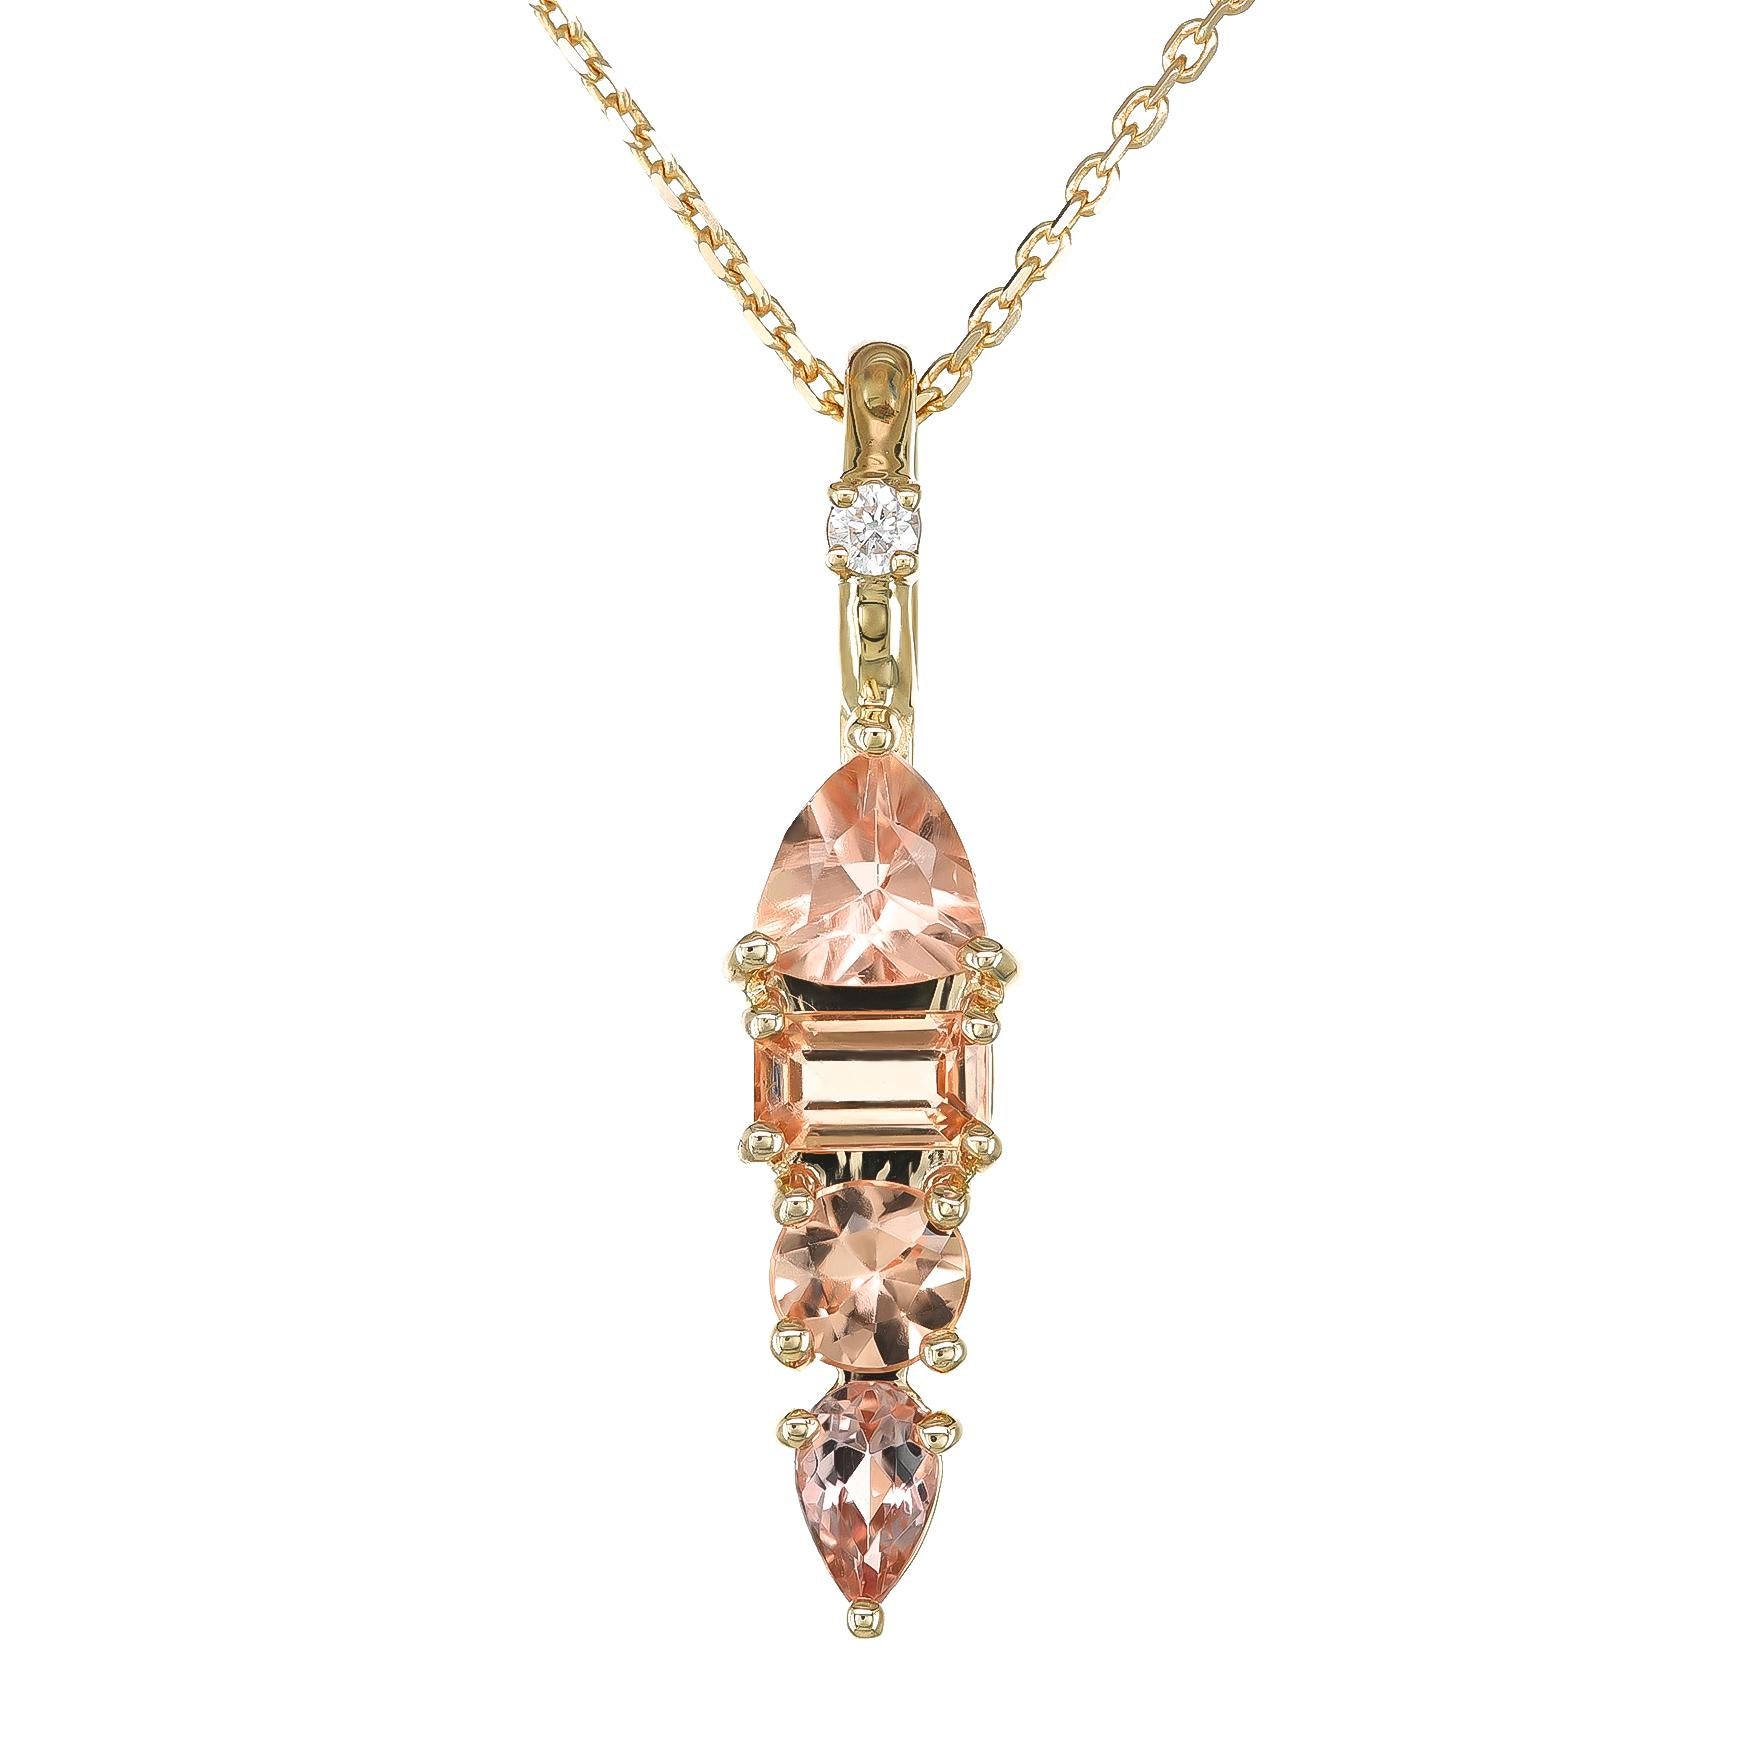 Pendant with 1.24 carats Imperial Topaz Diamonds set in 14K Yellow Gold In New Condition For Sale In Los Angeles, CA